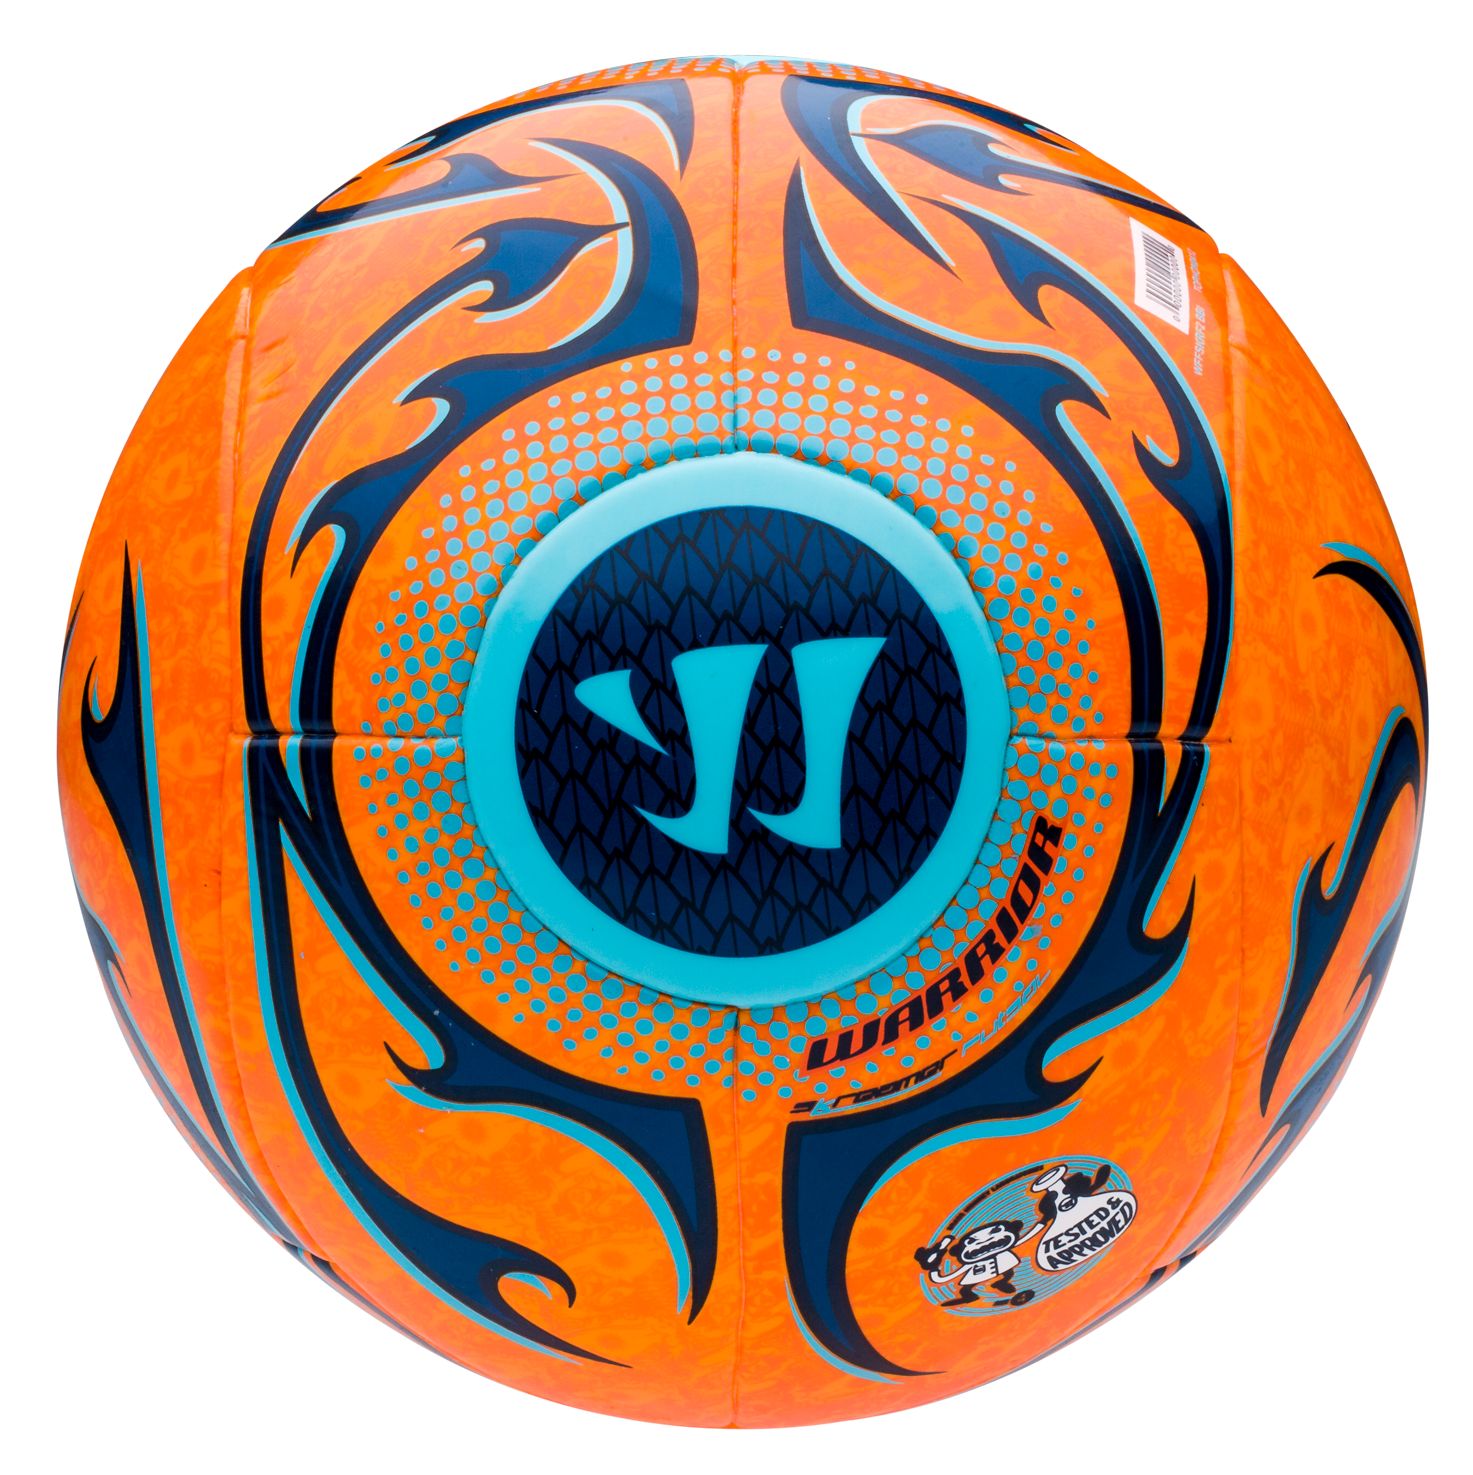 Skreamer Futsal Ball, Bright Marigold with Blue Radiance & Insignia Blue image number 0